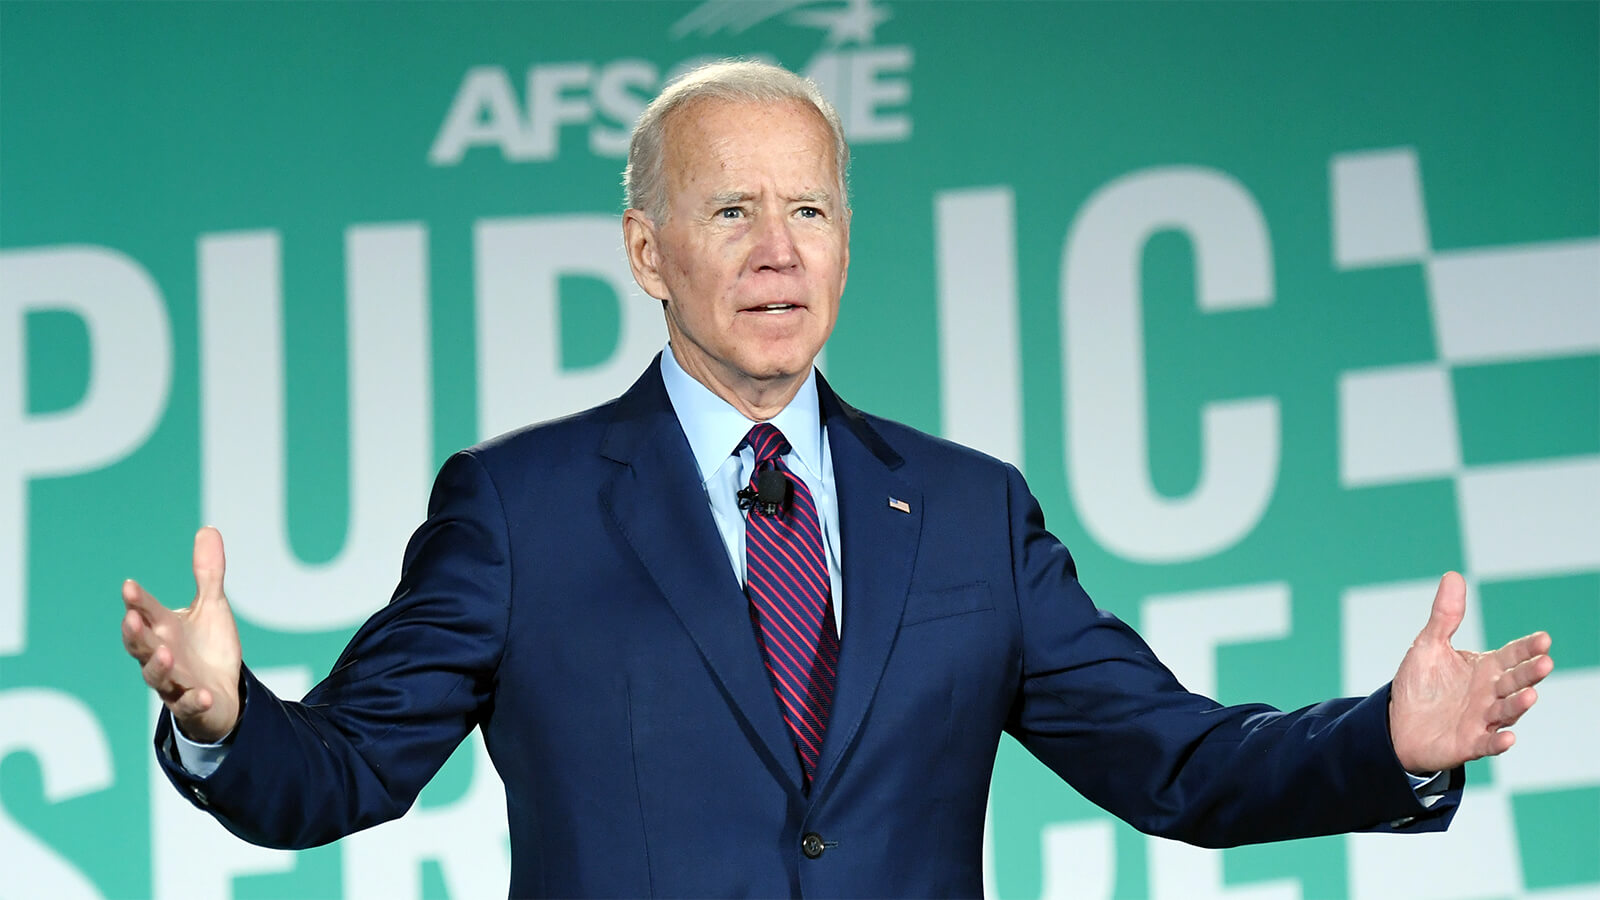 AFSCME Endorses Biden, Lauding His Robust Pro-Worker Record